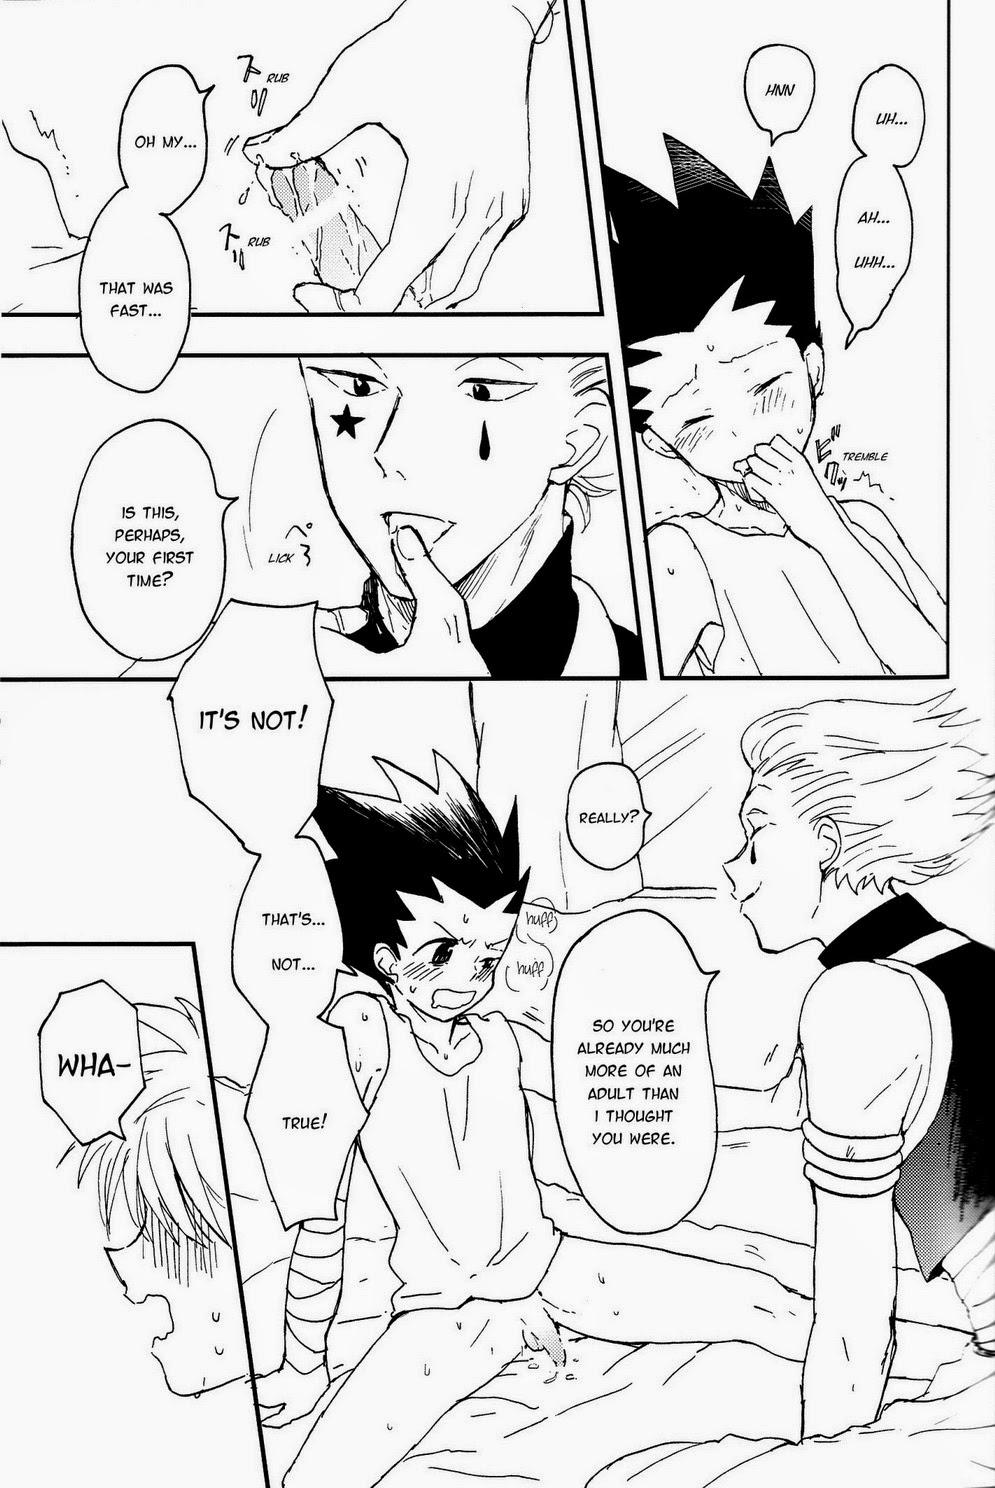 Ikillitts Okosama Lunch - Hunter x hunter Officesex - Page 2